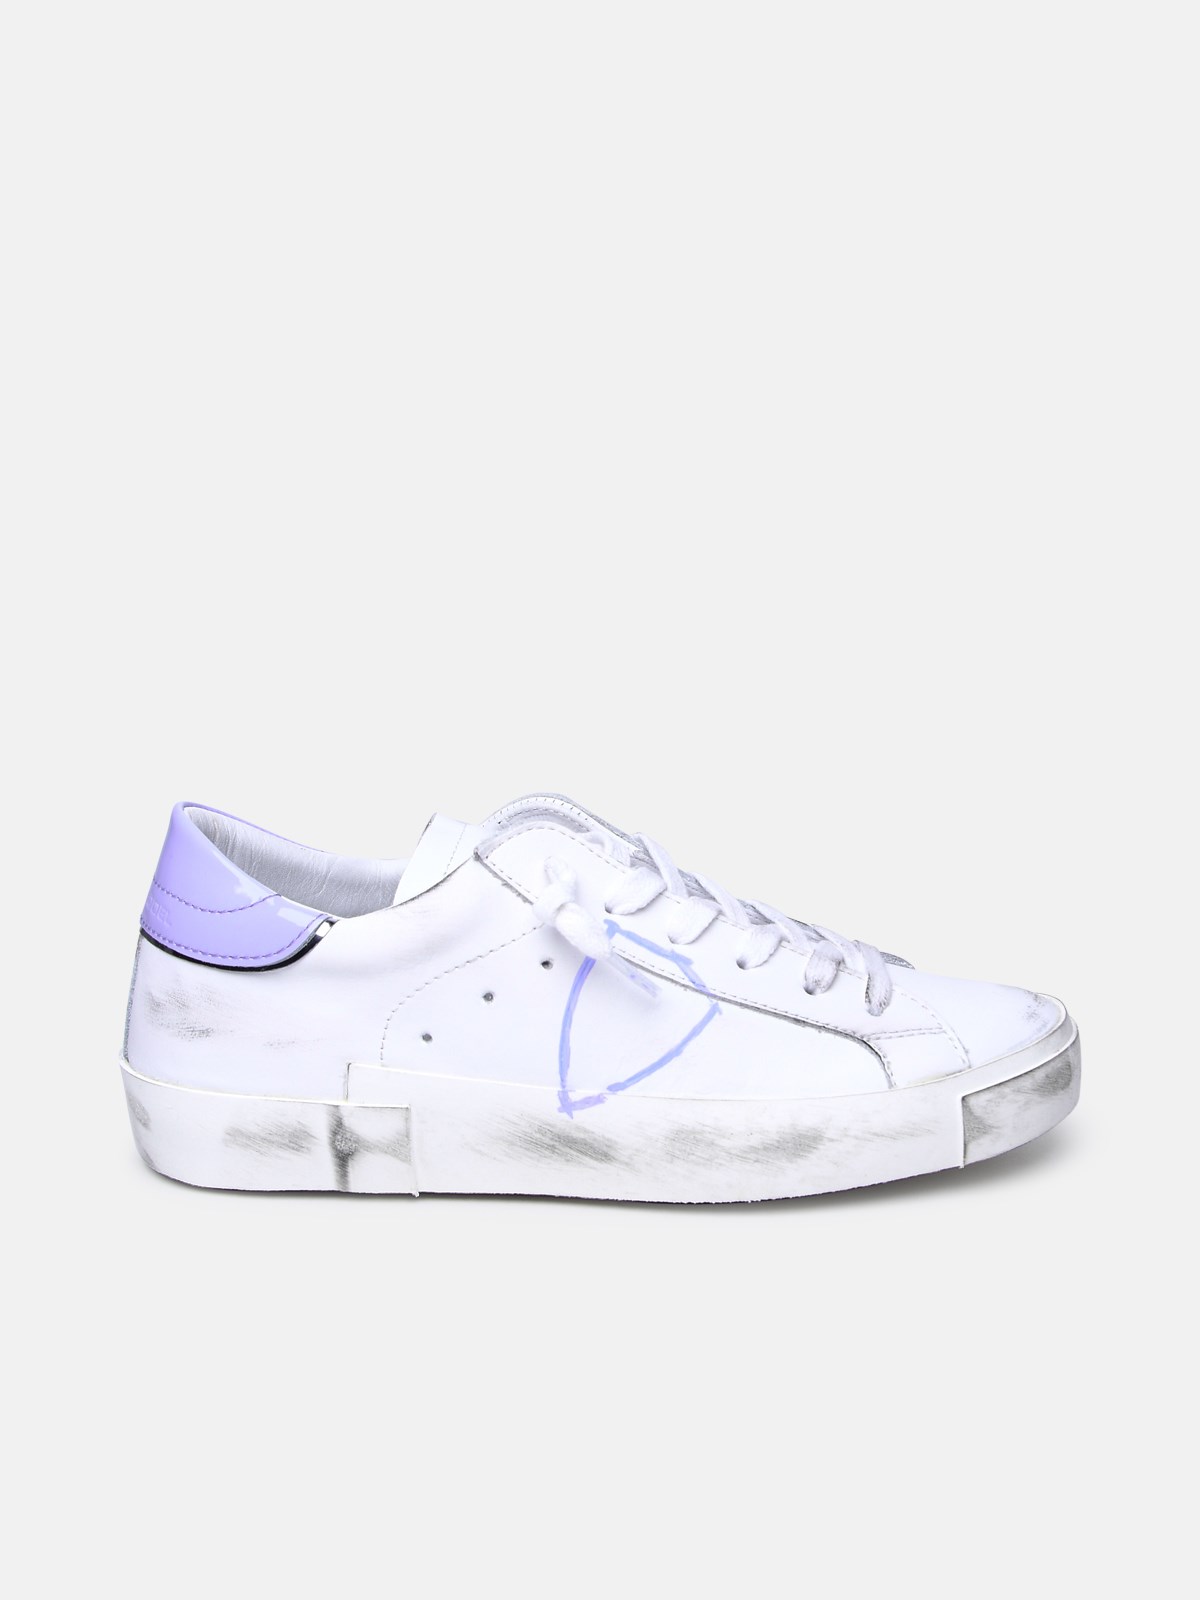 Philippe Model White Leather Sneakers